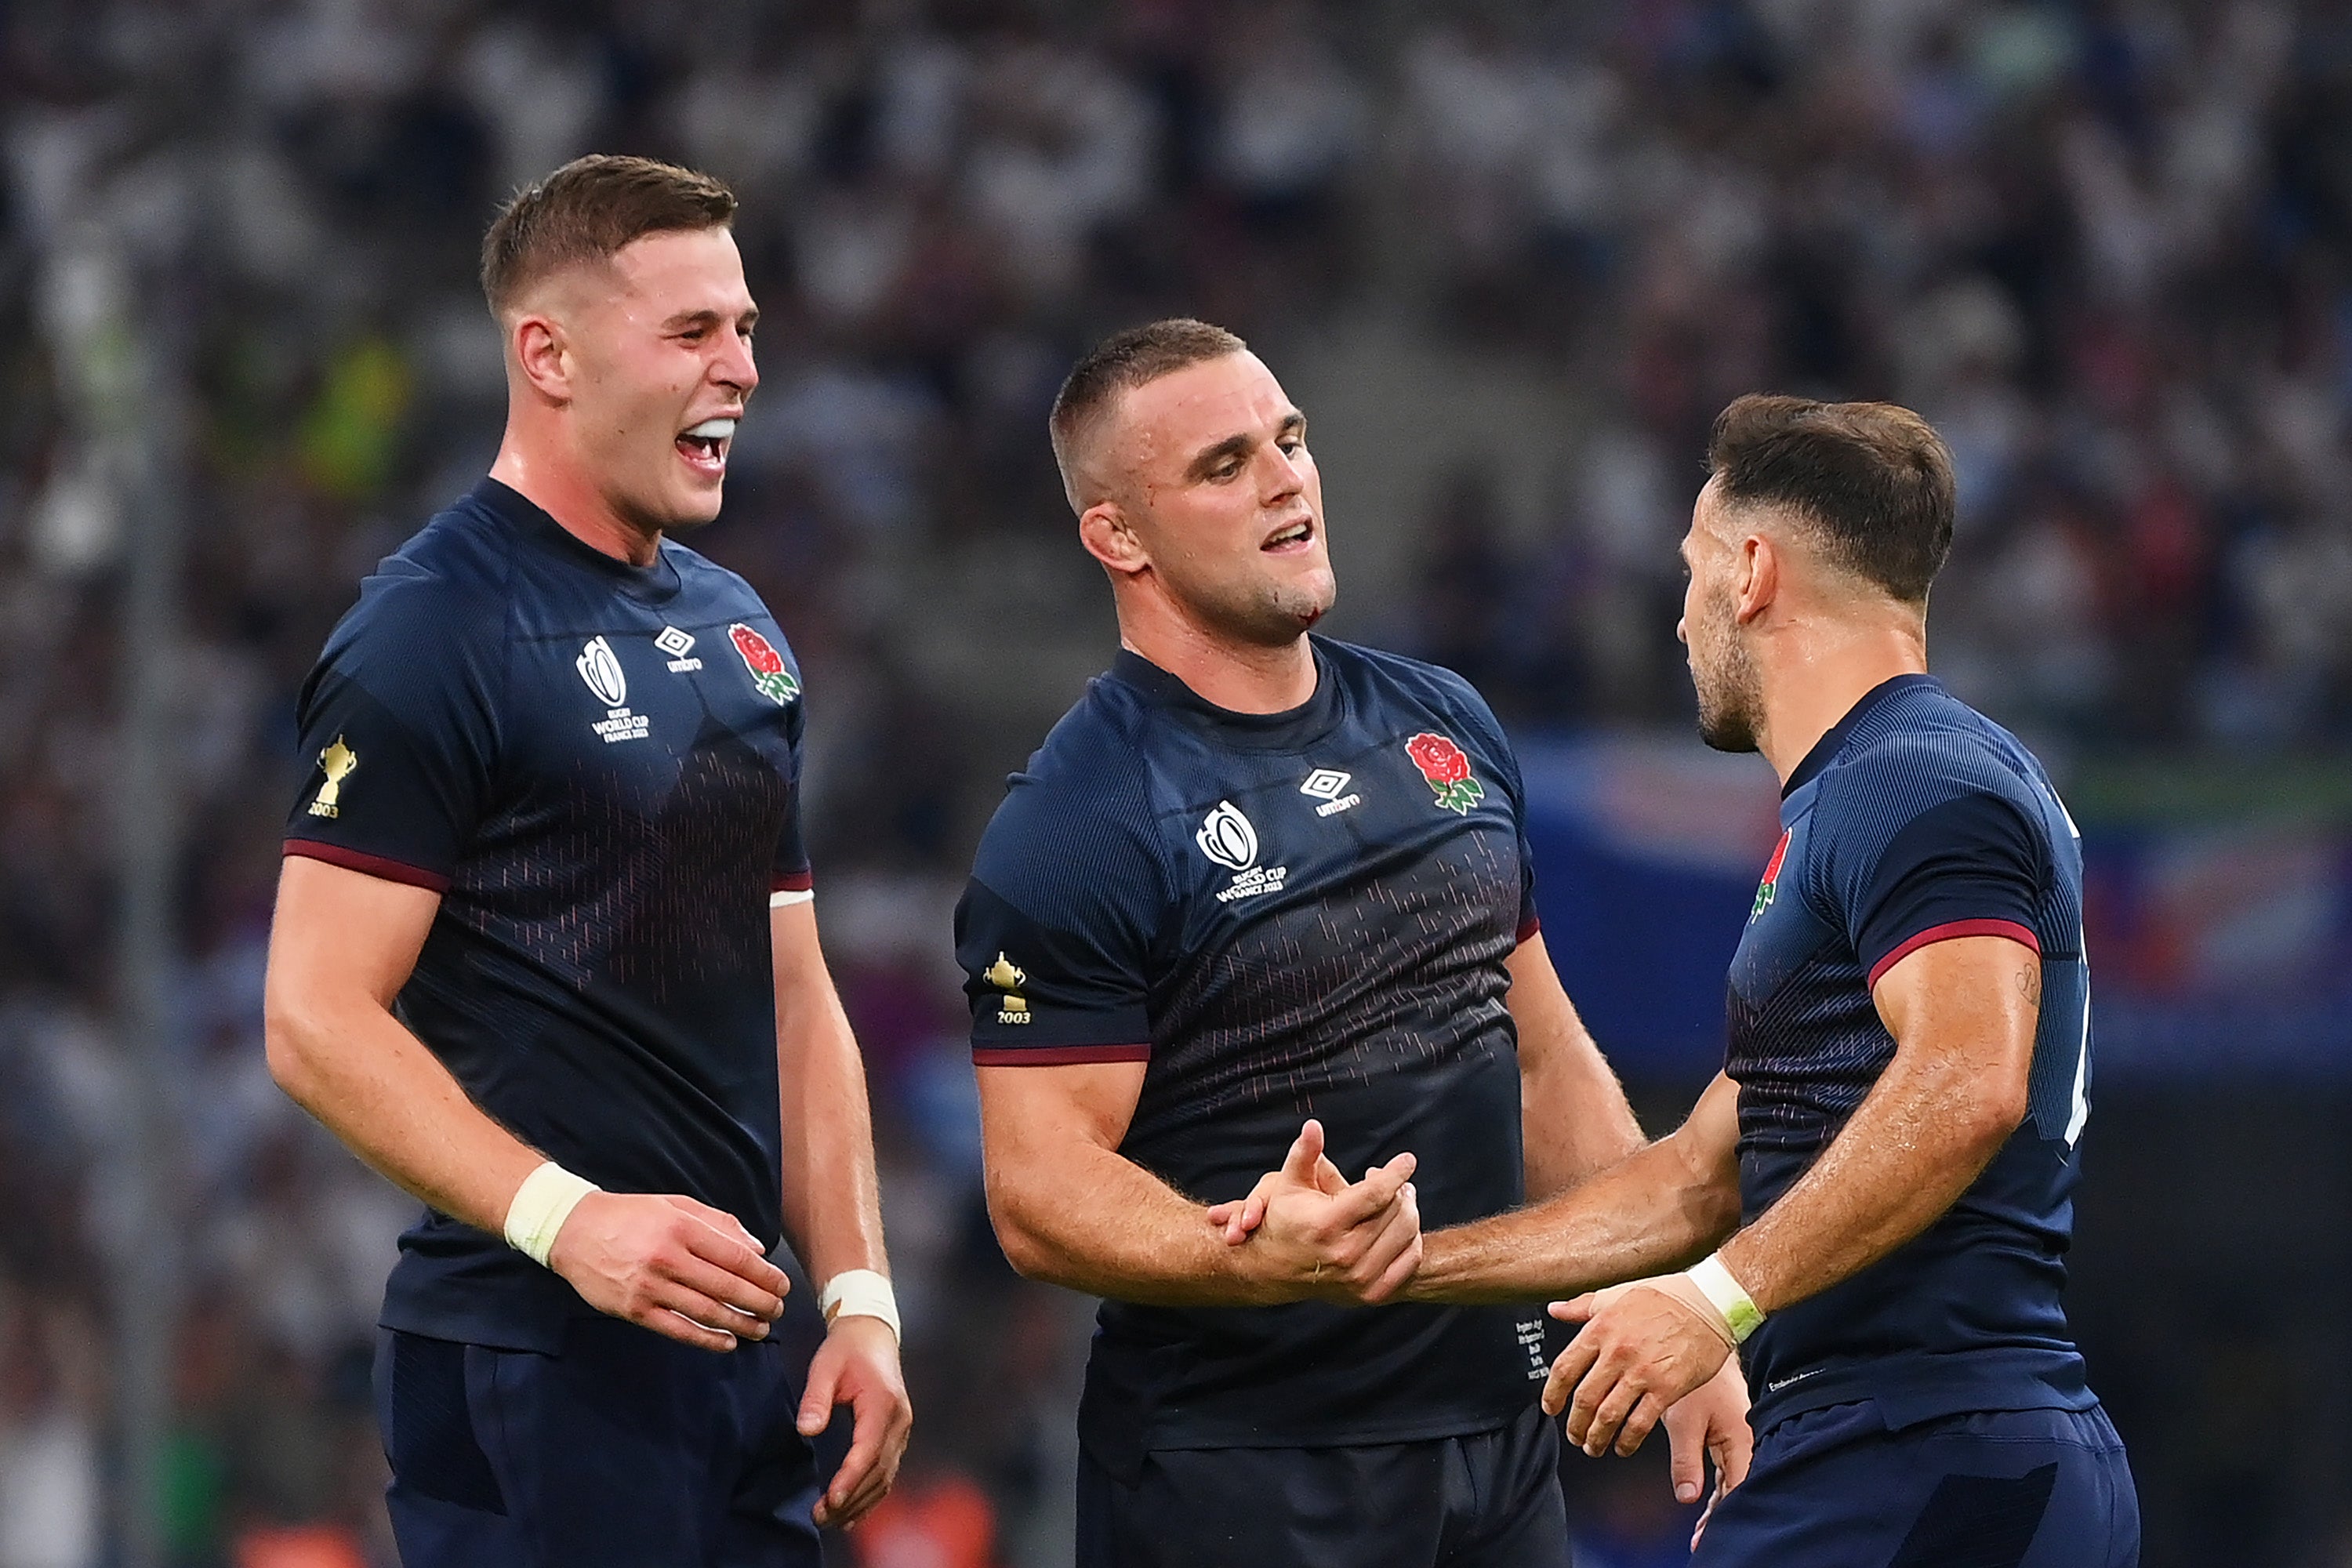 England are enjoying a good World Cup but Bill Sweeney insists changes must be made